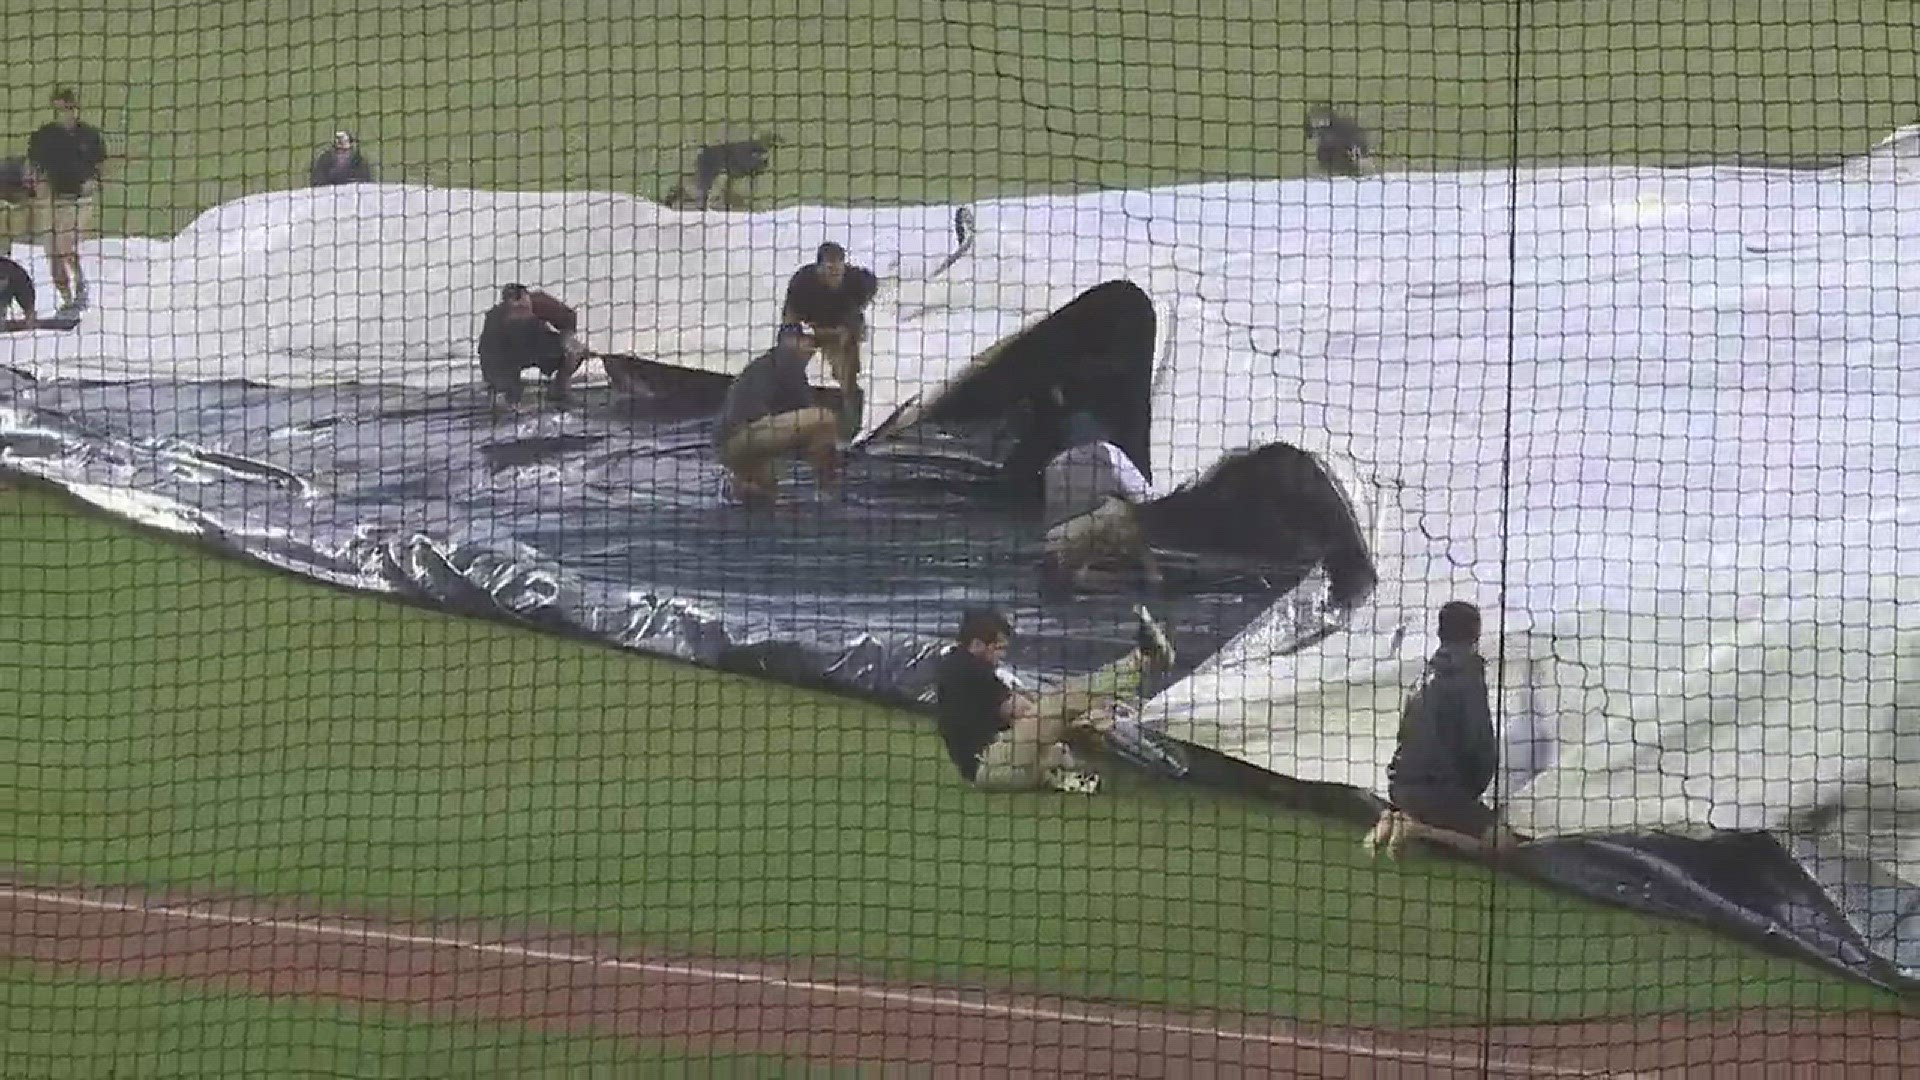 Storms caused the Cubs' Double-A affiliate, the Tennessee Smokies, to suspend their game with Jackson. The grounds crew had a hard time getting the tarp on the field amid heavy rain and high winds.